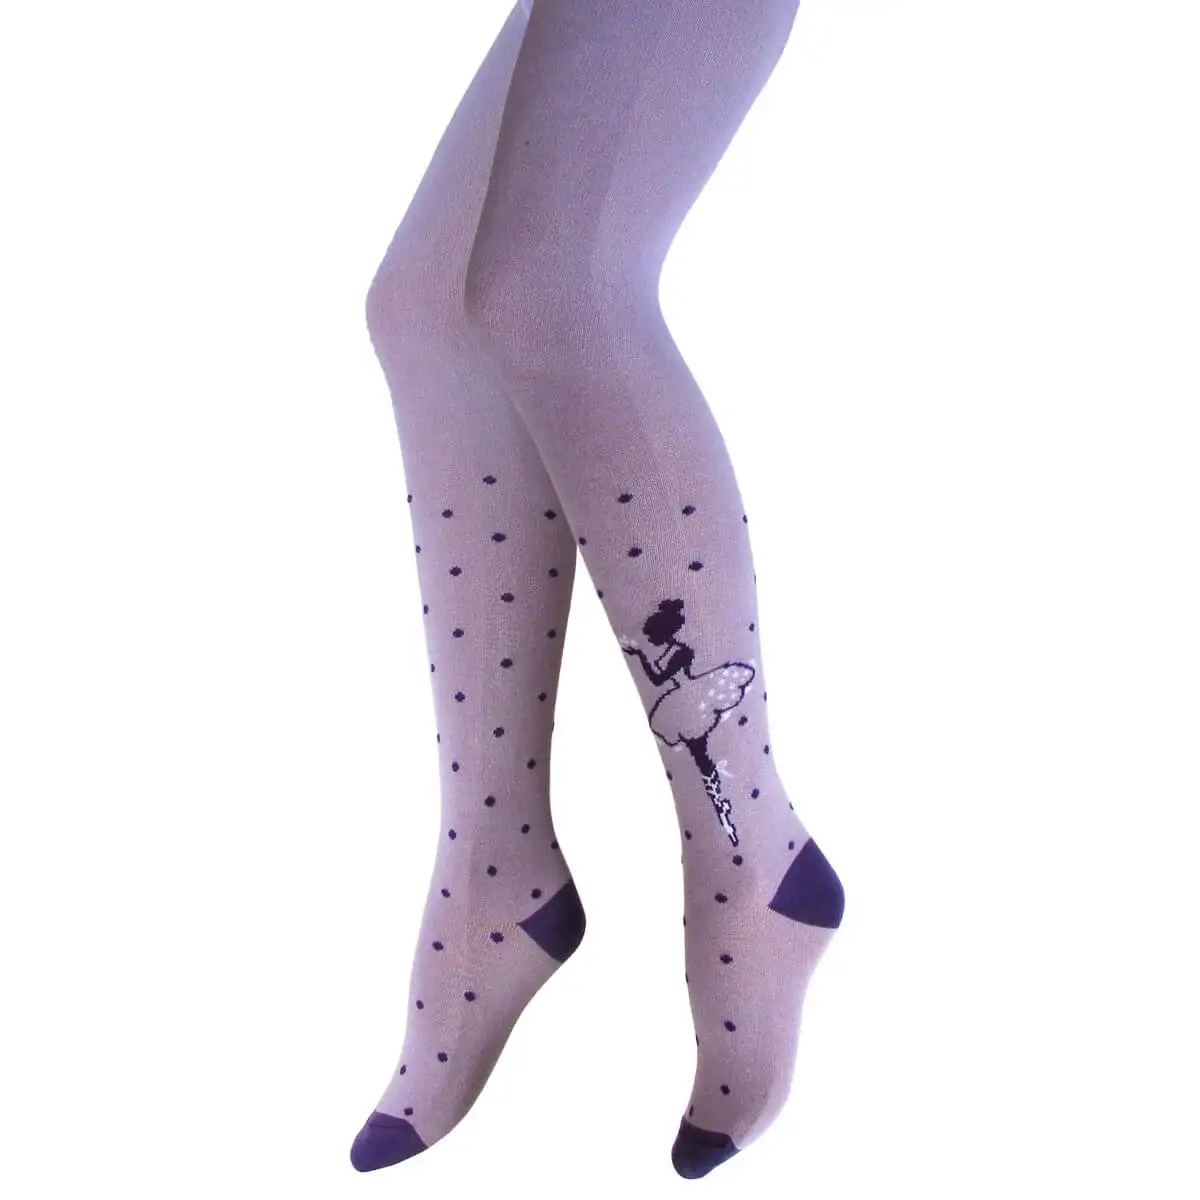 Source Hot Selling Product Fashionable Designed Tights For Girls Of School  Age From Russian Manufacturer Low Price on m.